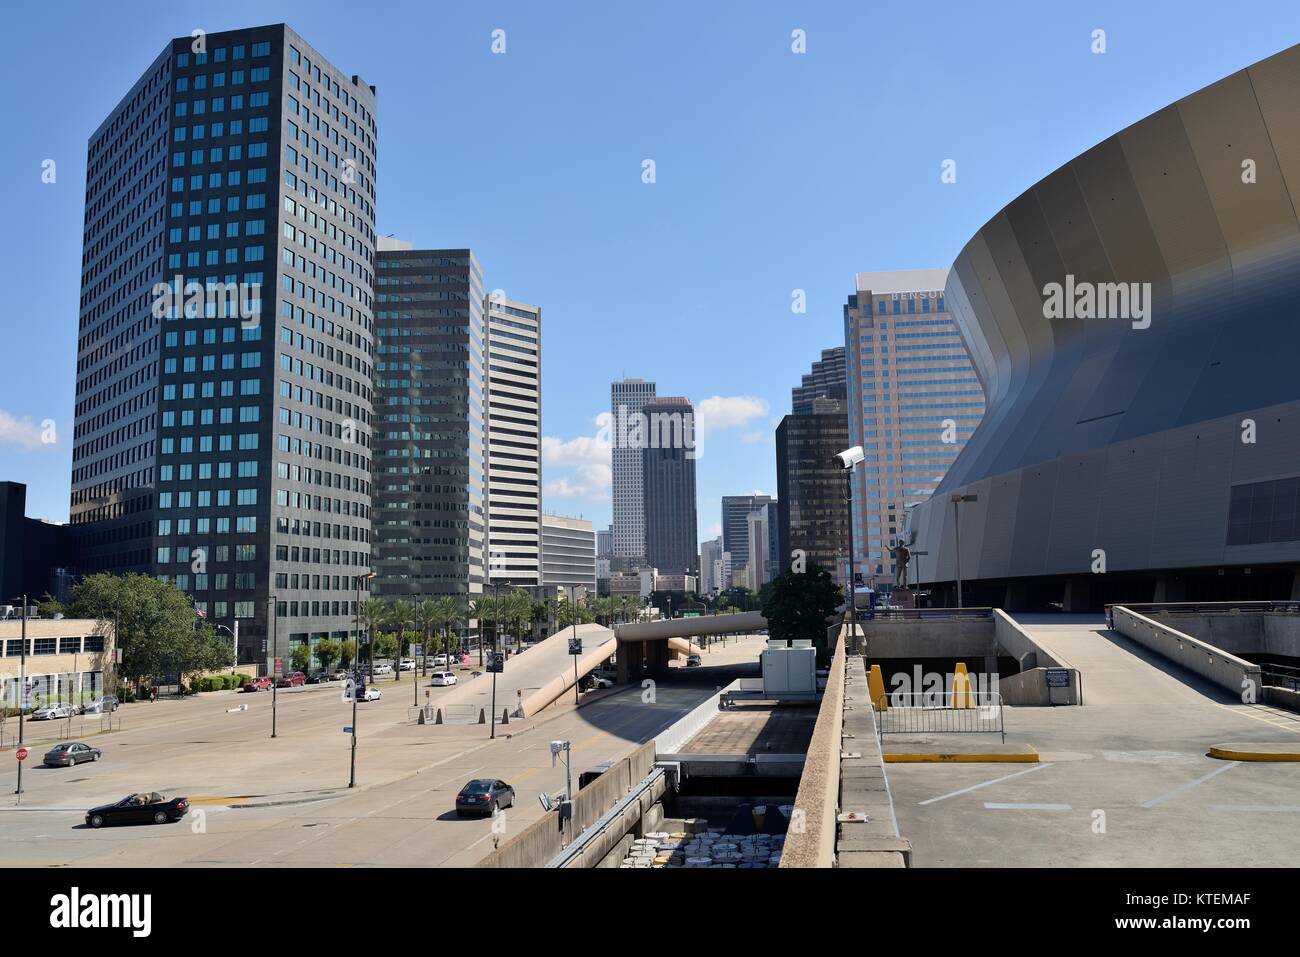 Downtown New Orlean - A street view of New Orleans' Downtown Center Business District, on the Poydras Street, next to the Superdome. Louisiana, USA. Stock Photo